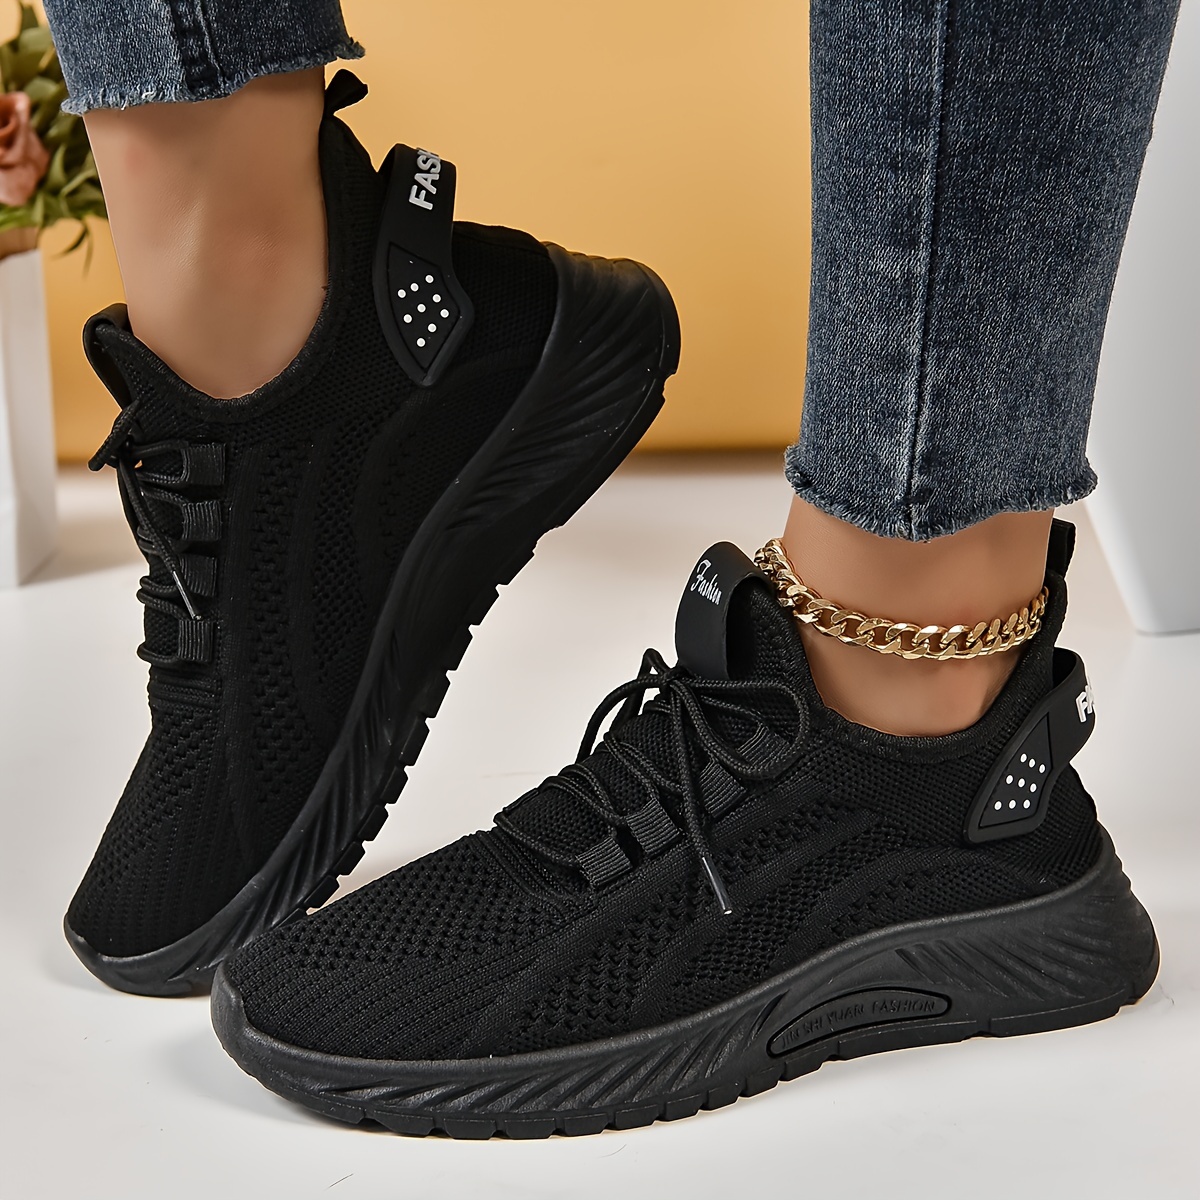 womens knitted sports shoes lightweight lace up low top running tennis sneakers breathable gym trainers details 3